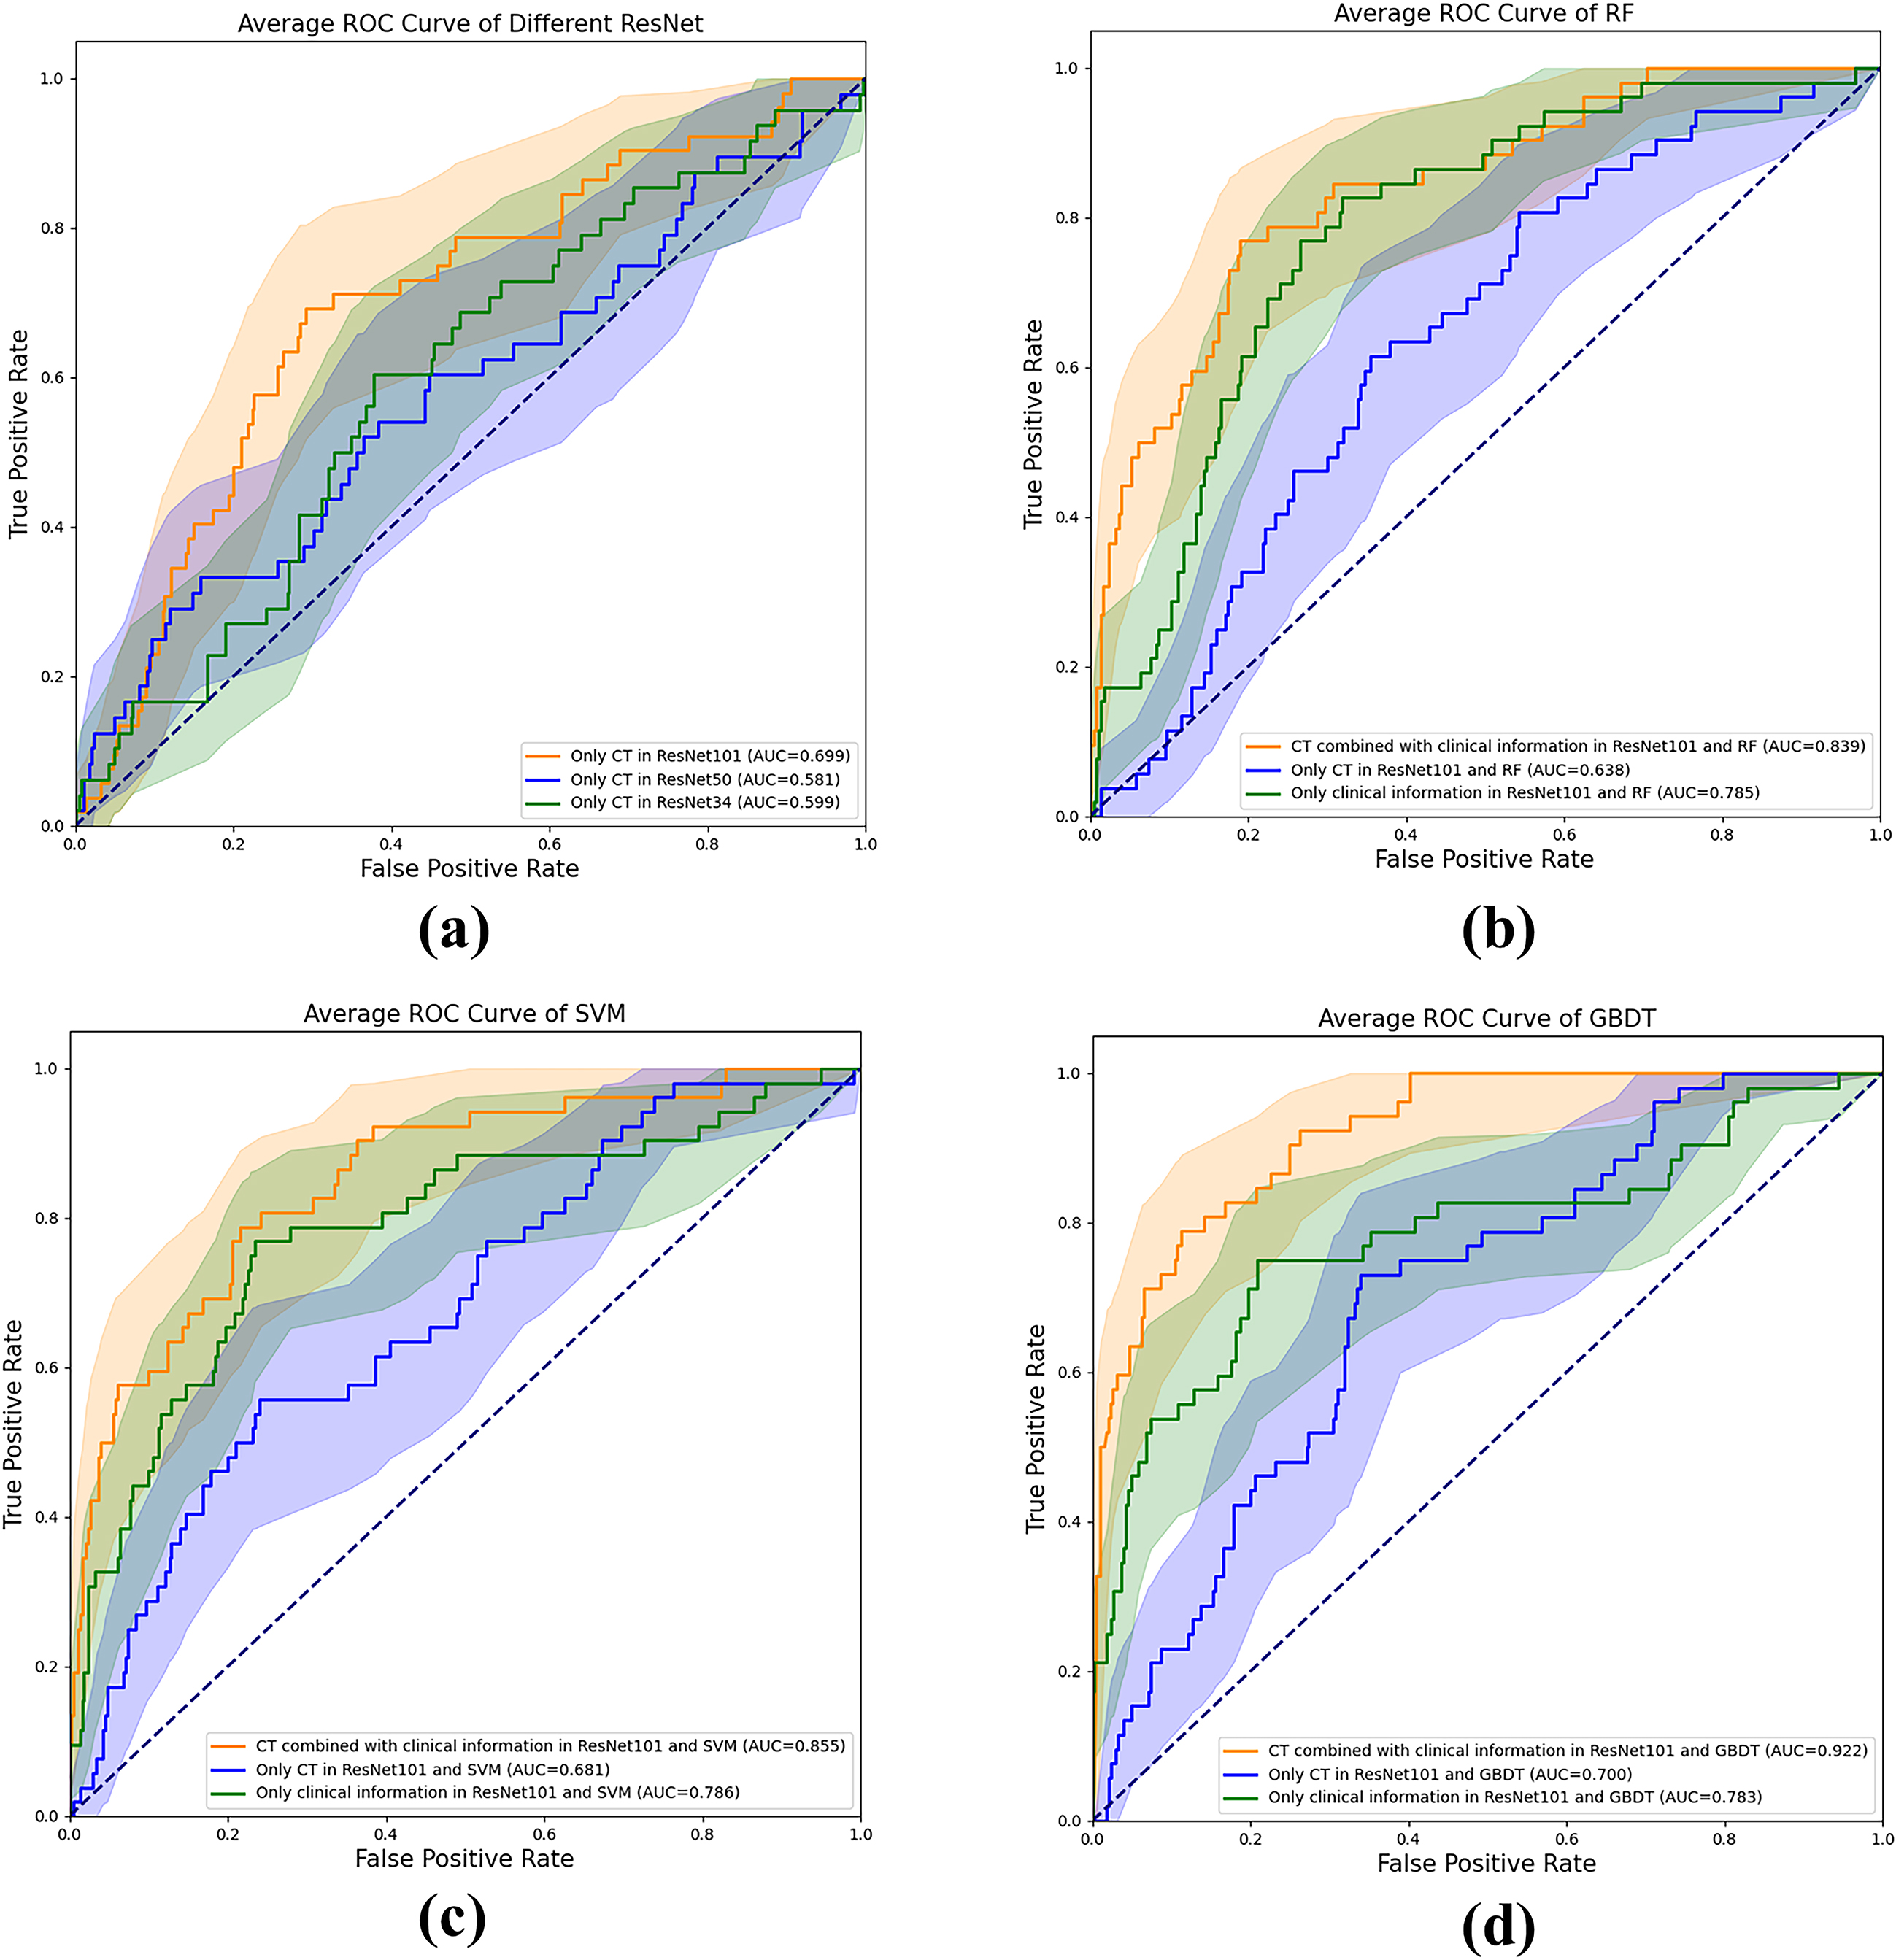 Comparison of receiver operating characteristic (ROC) curves between different models for predicting bone metastases. Figure (a) is the ROC image on the test set when different ResNet models only have CT. Figure (b-c) are ROC images of different machine learning models under different data conditions.